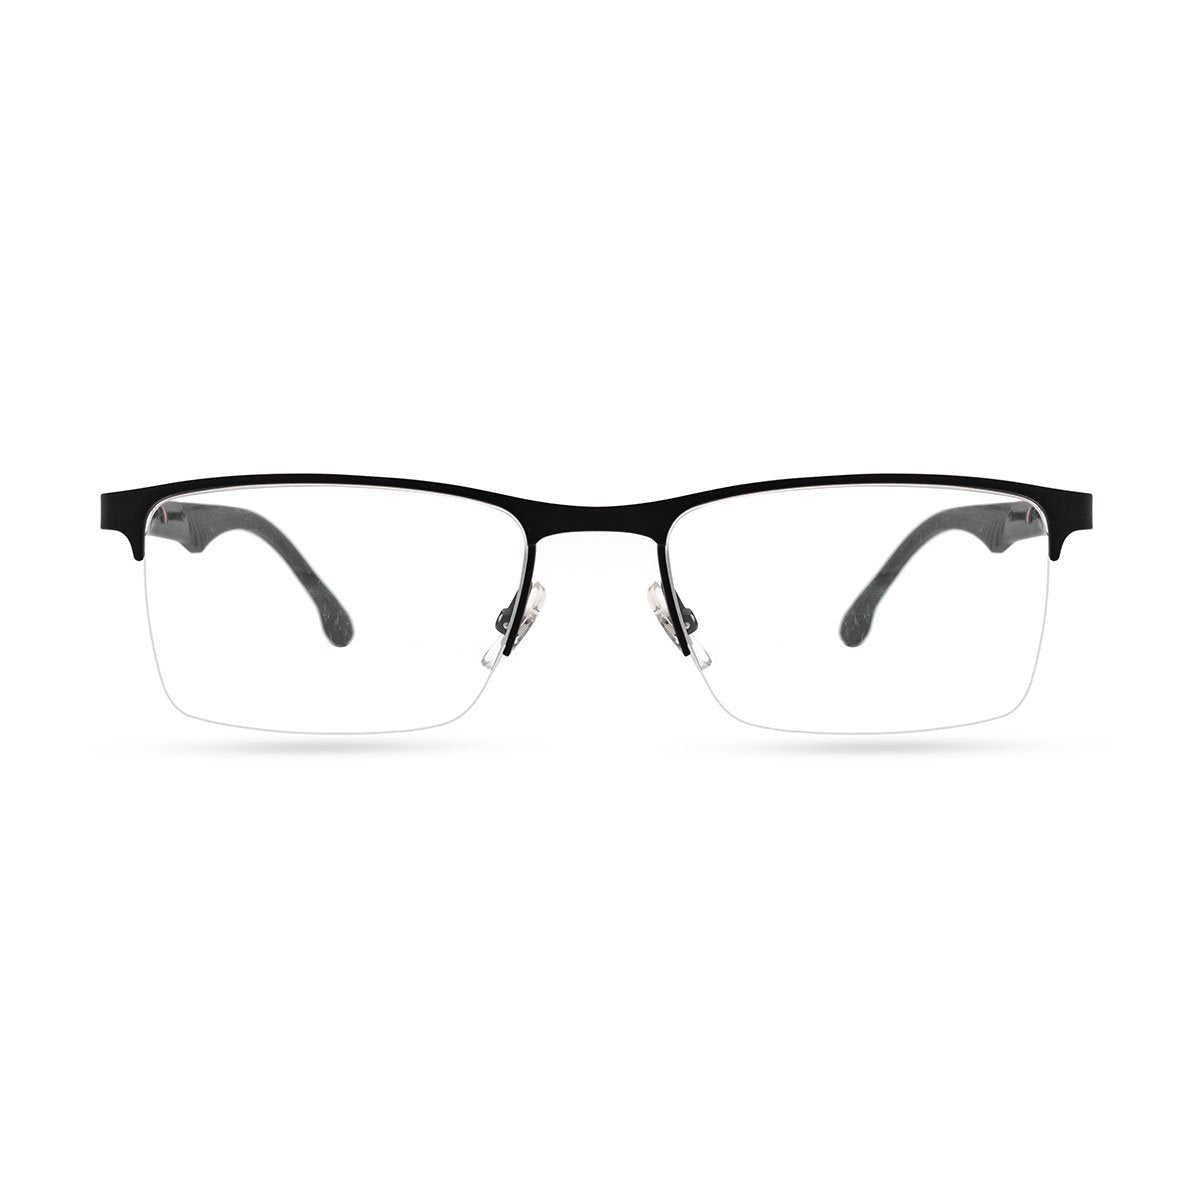 CARRERA 8846 3 spectacle-frame